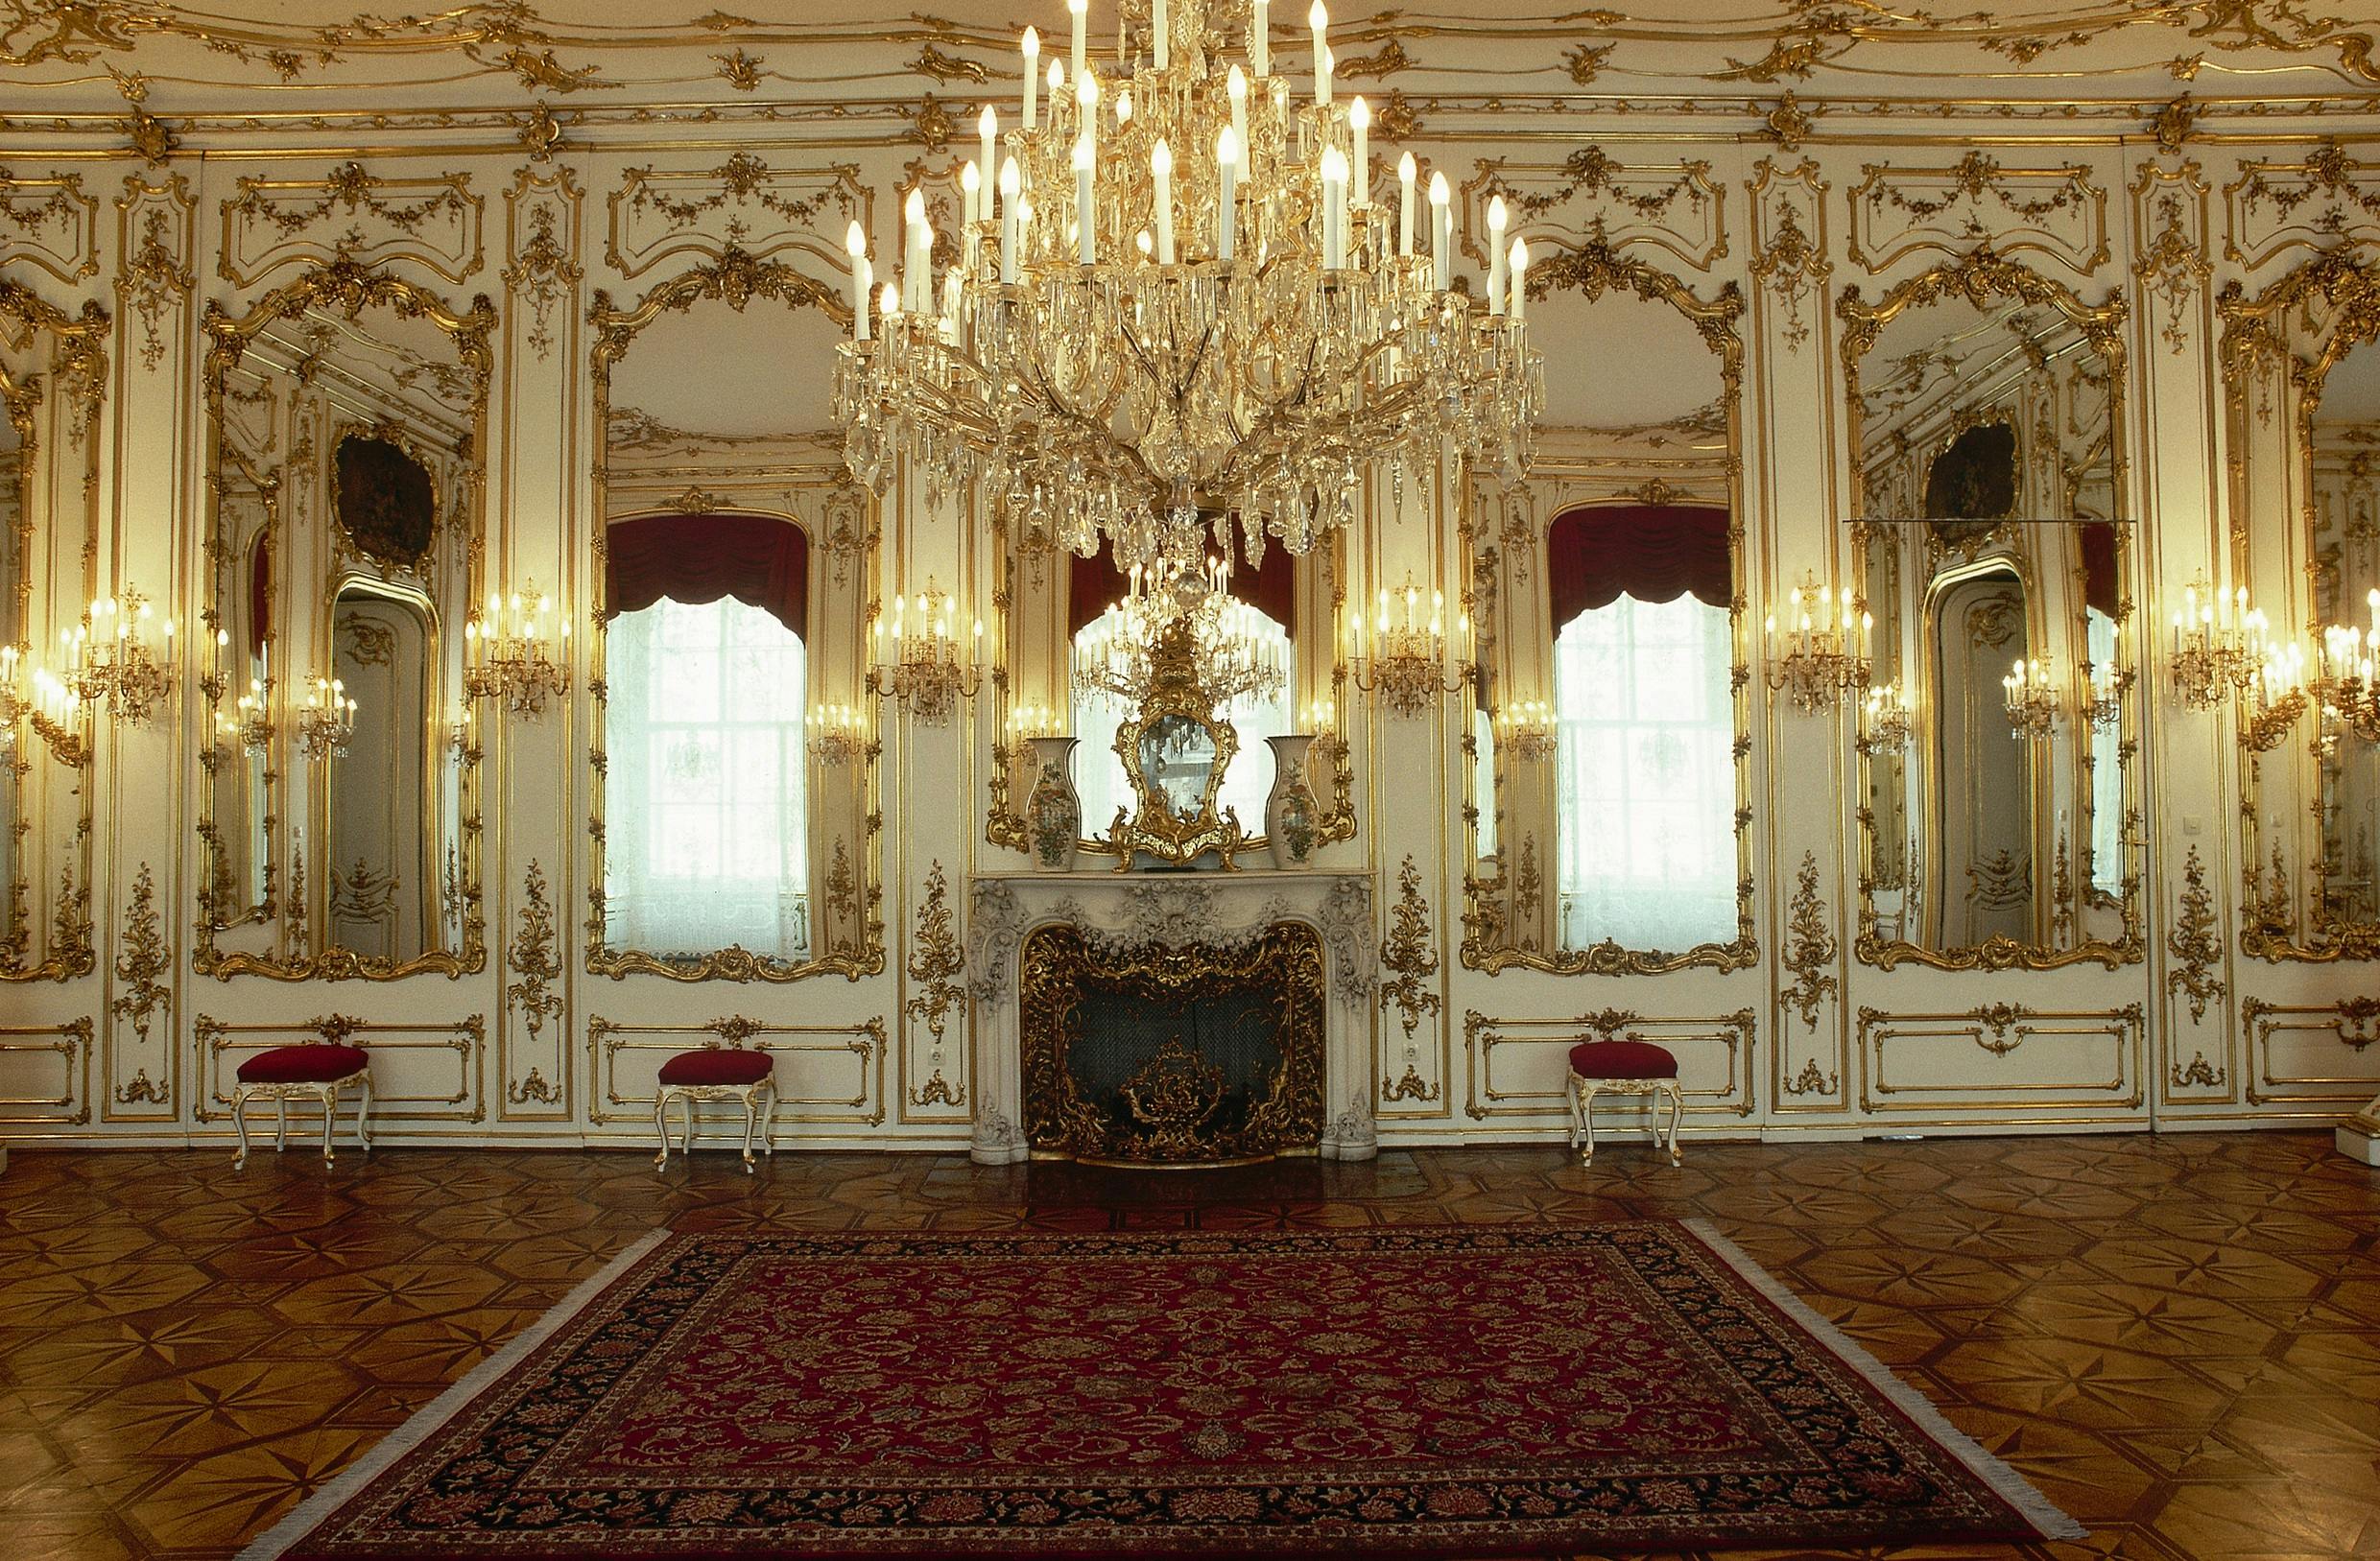 Empress Sisi and Imperial Appartments tour in Vienna Musement